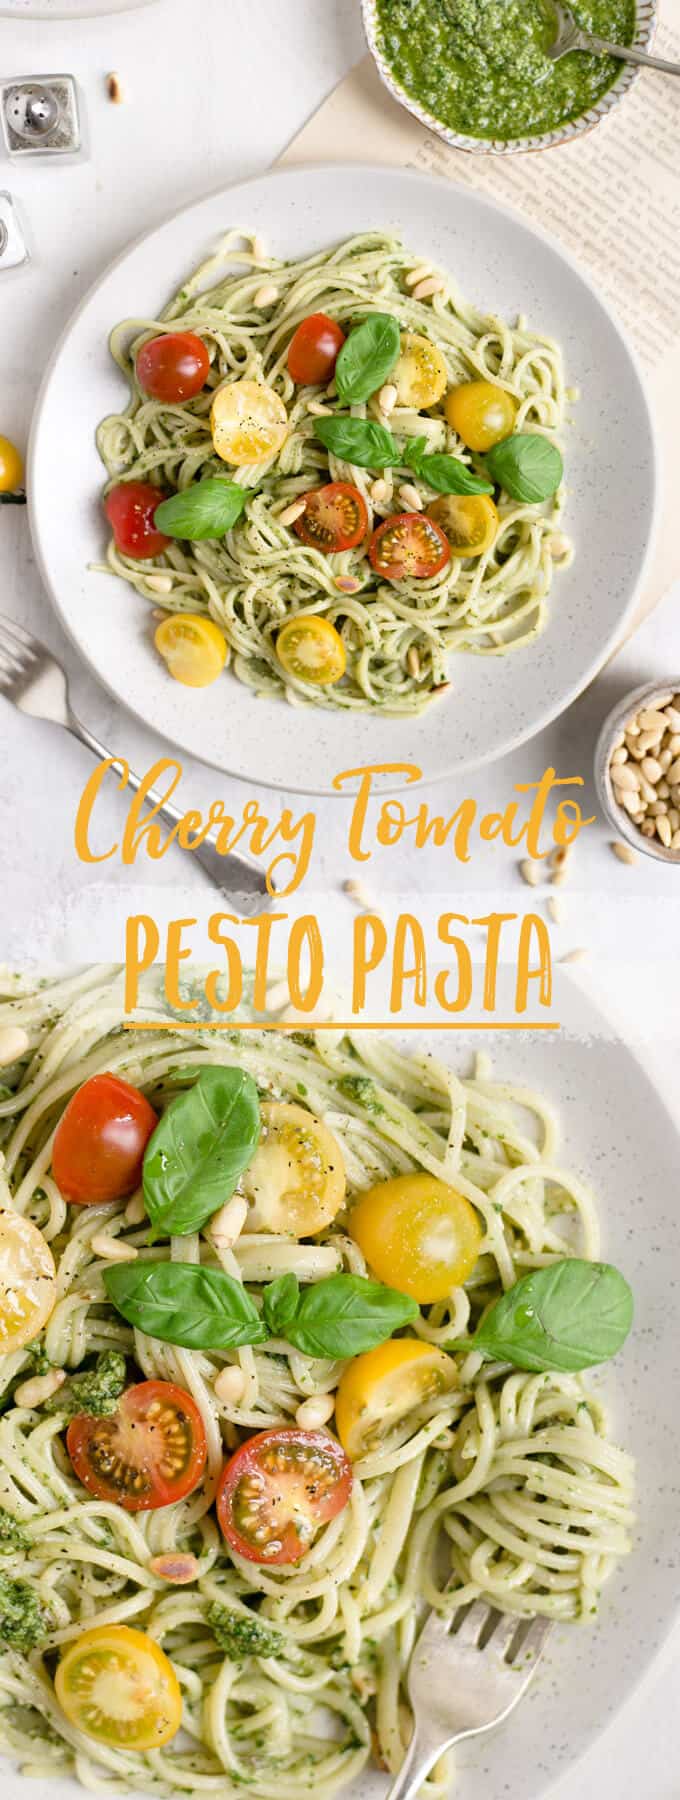 Pesto pasta with cherry tomatoes. Quick and easy idea for lunch or dinner, ready in 15 minutes! #veganrecipe #healthyrecipe #pasta | via @annabanana.co